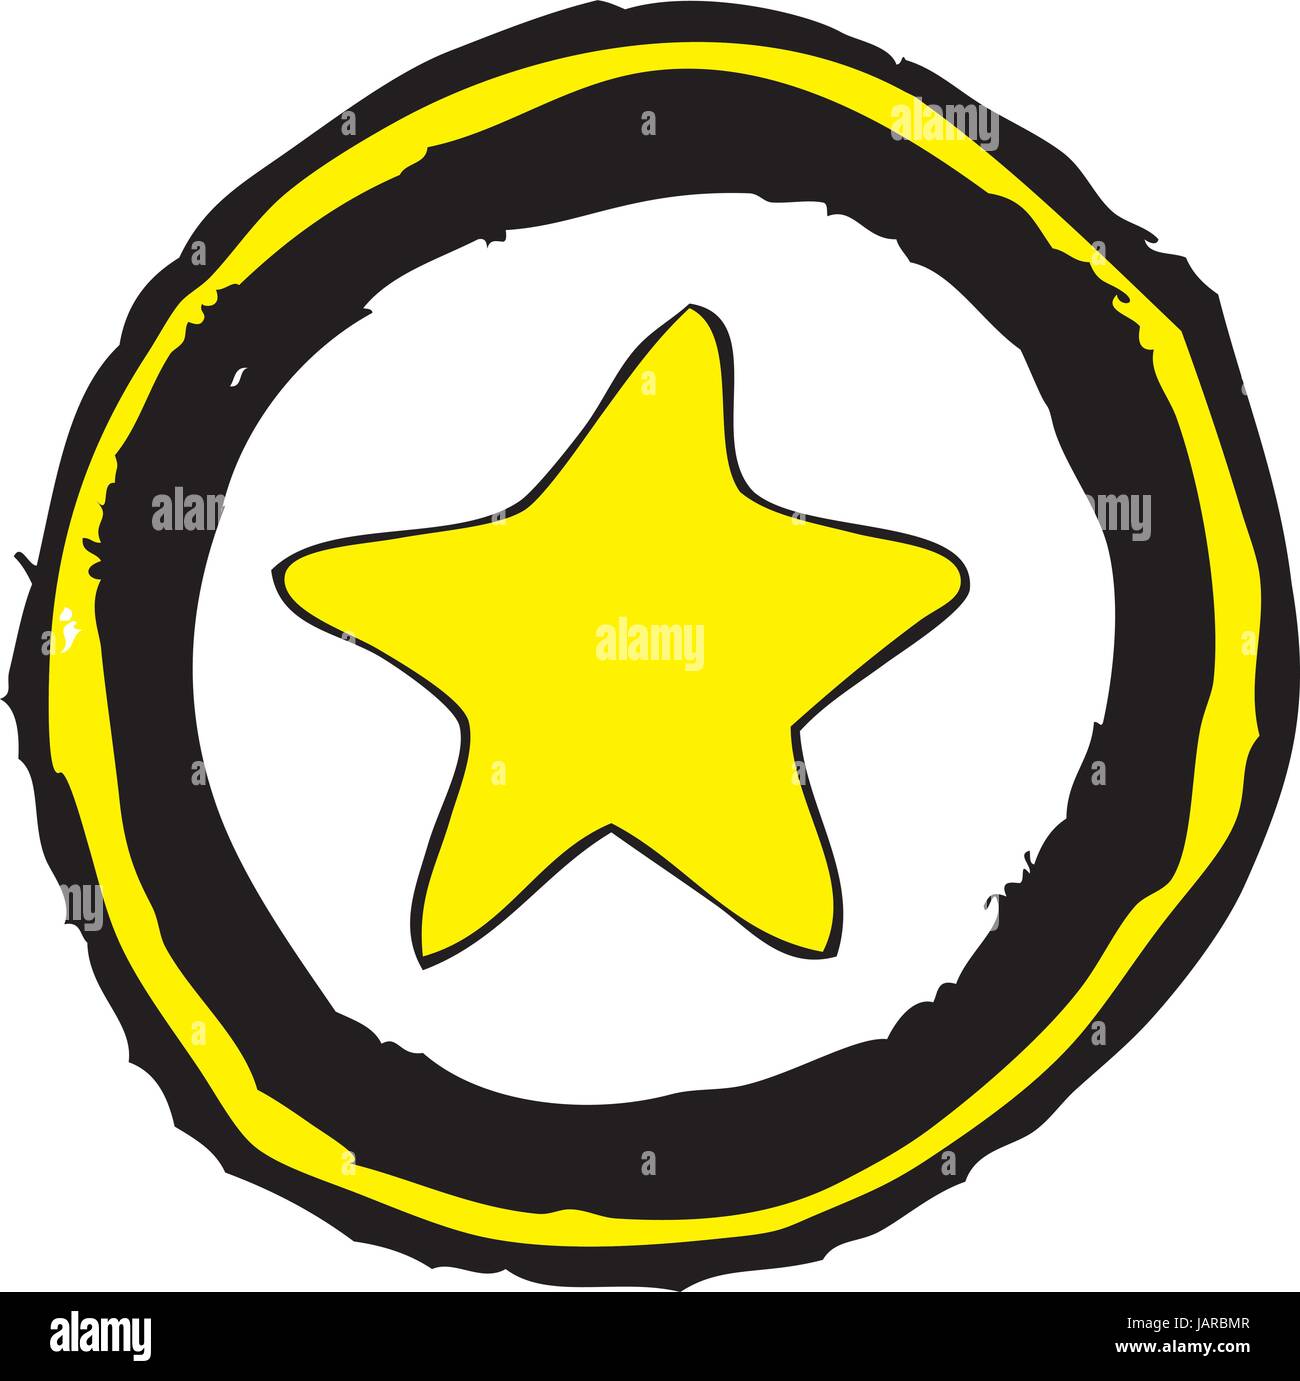 Star drawn in a rough hand drawn sketch style vector Stock Vector